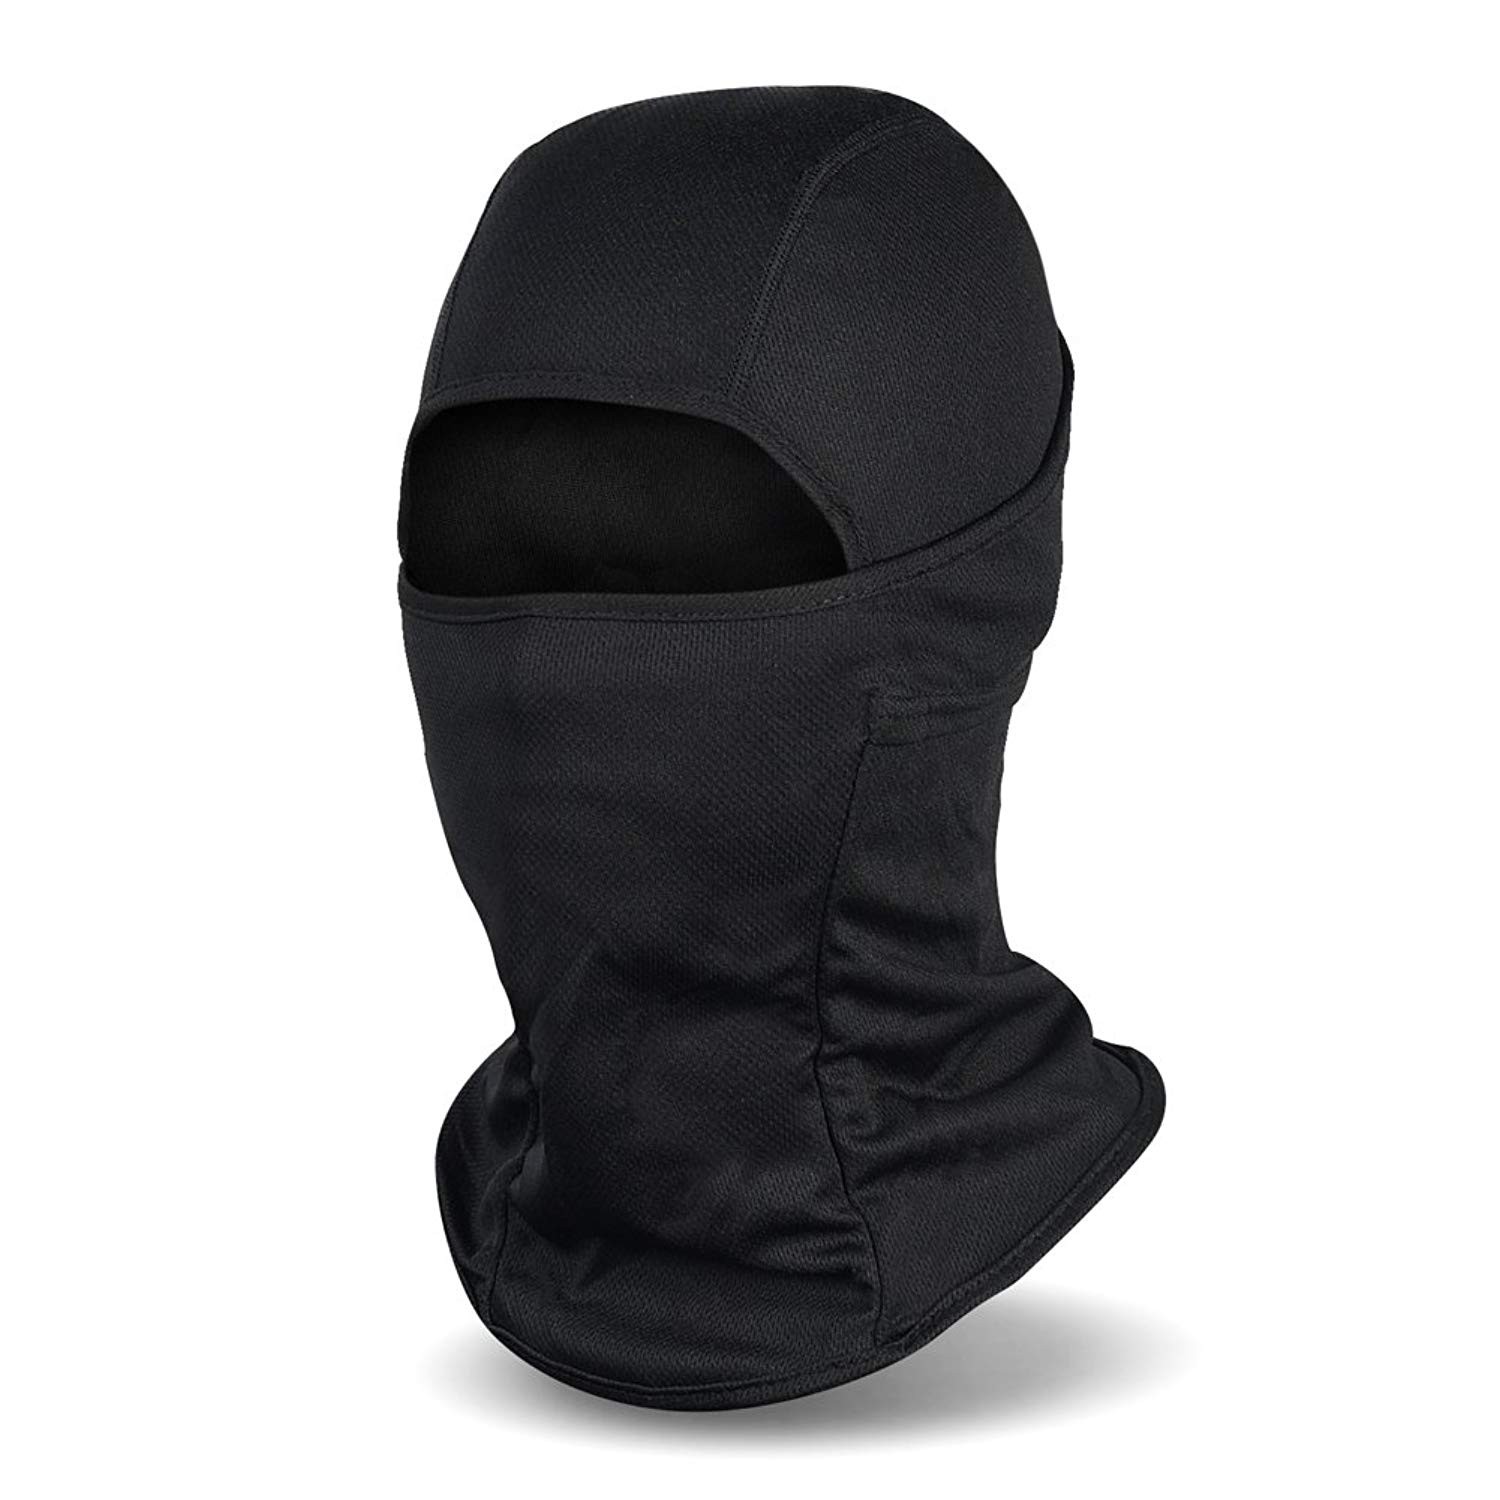 Custom Windproof and Dust protection Outdoor Cycling Motorcycle Balaclava Hood Breathable Full Face Mask